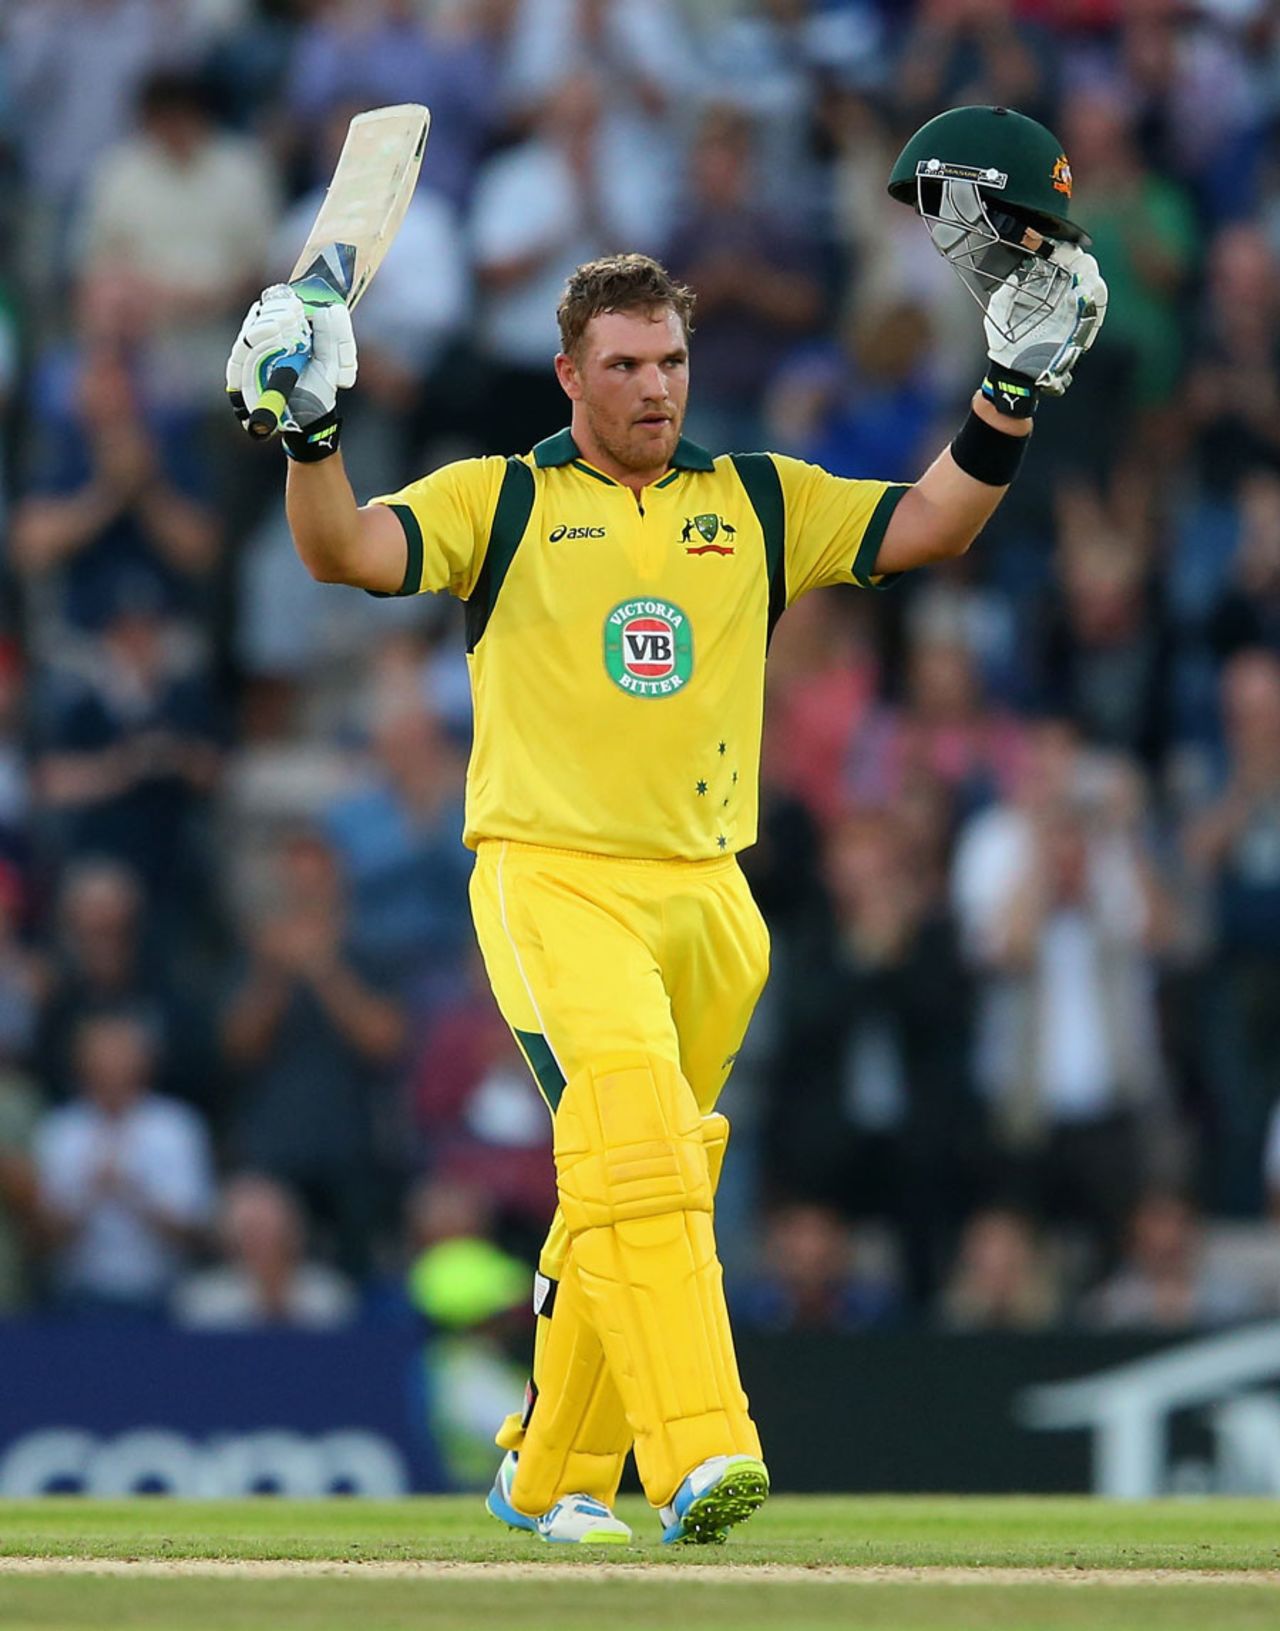 Aaron Finch made a century from just 47 balls, England v Australia, 1st T20, Ageas Bowl, August 29, 2013